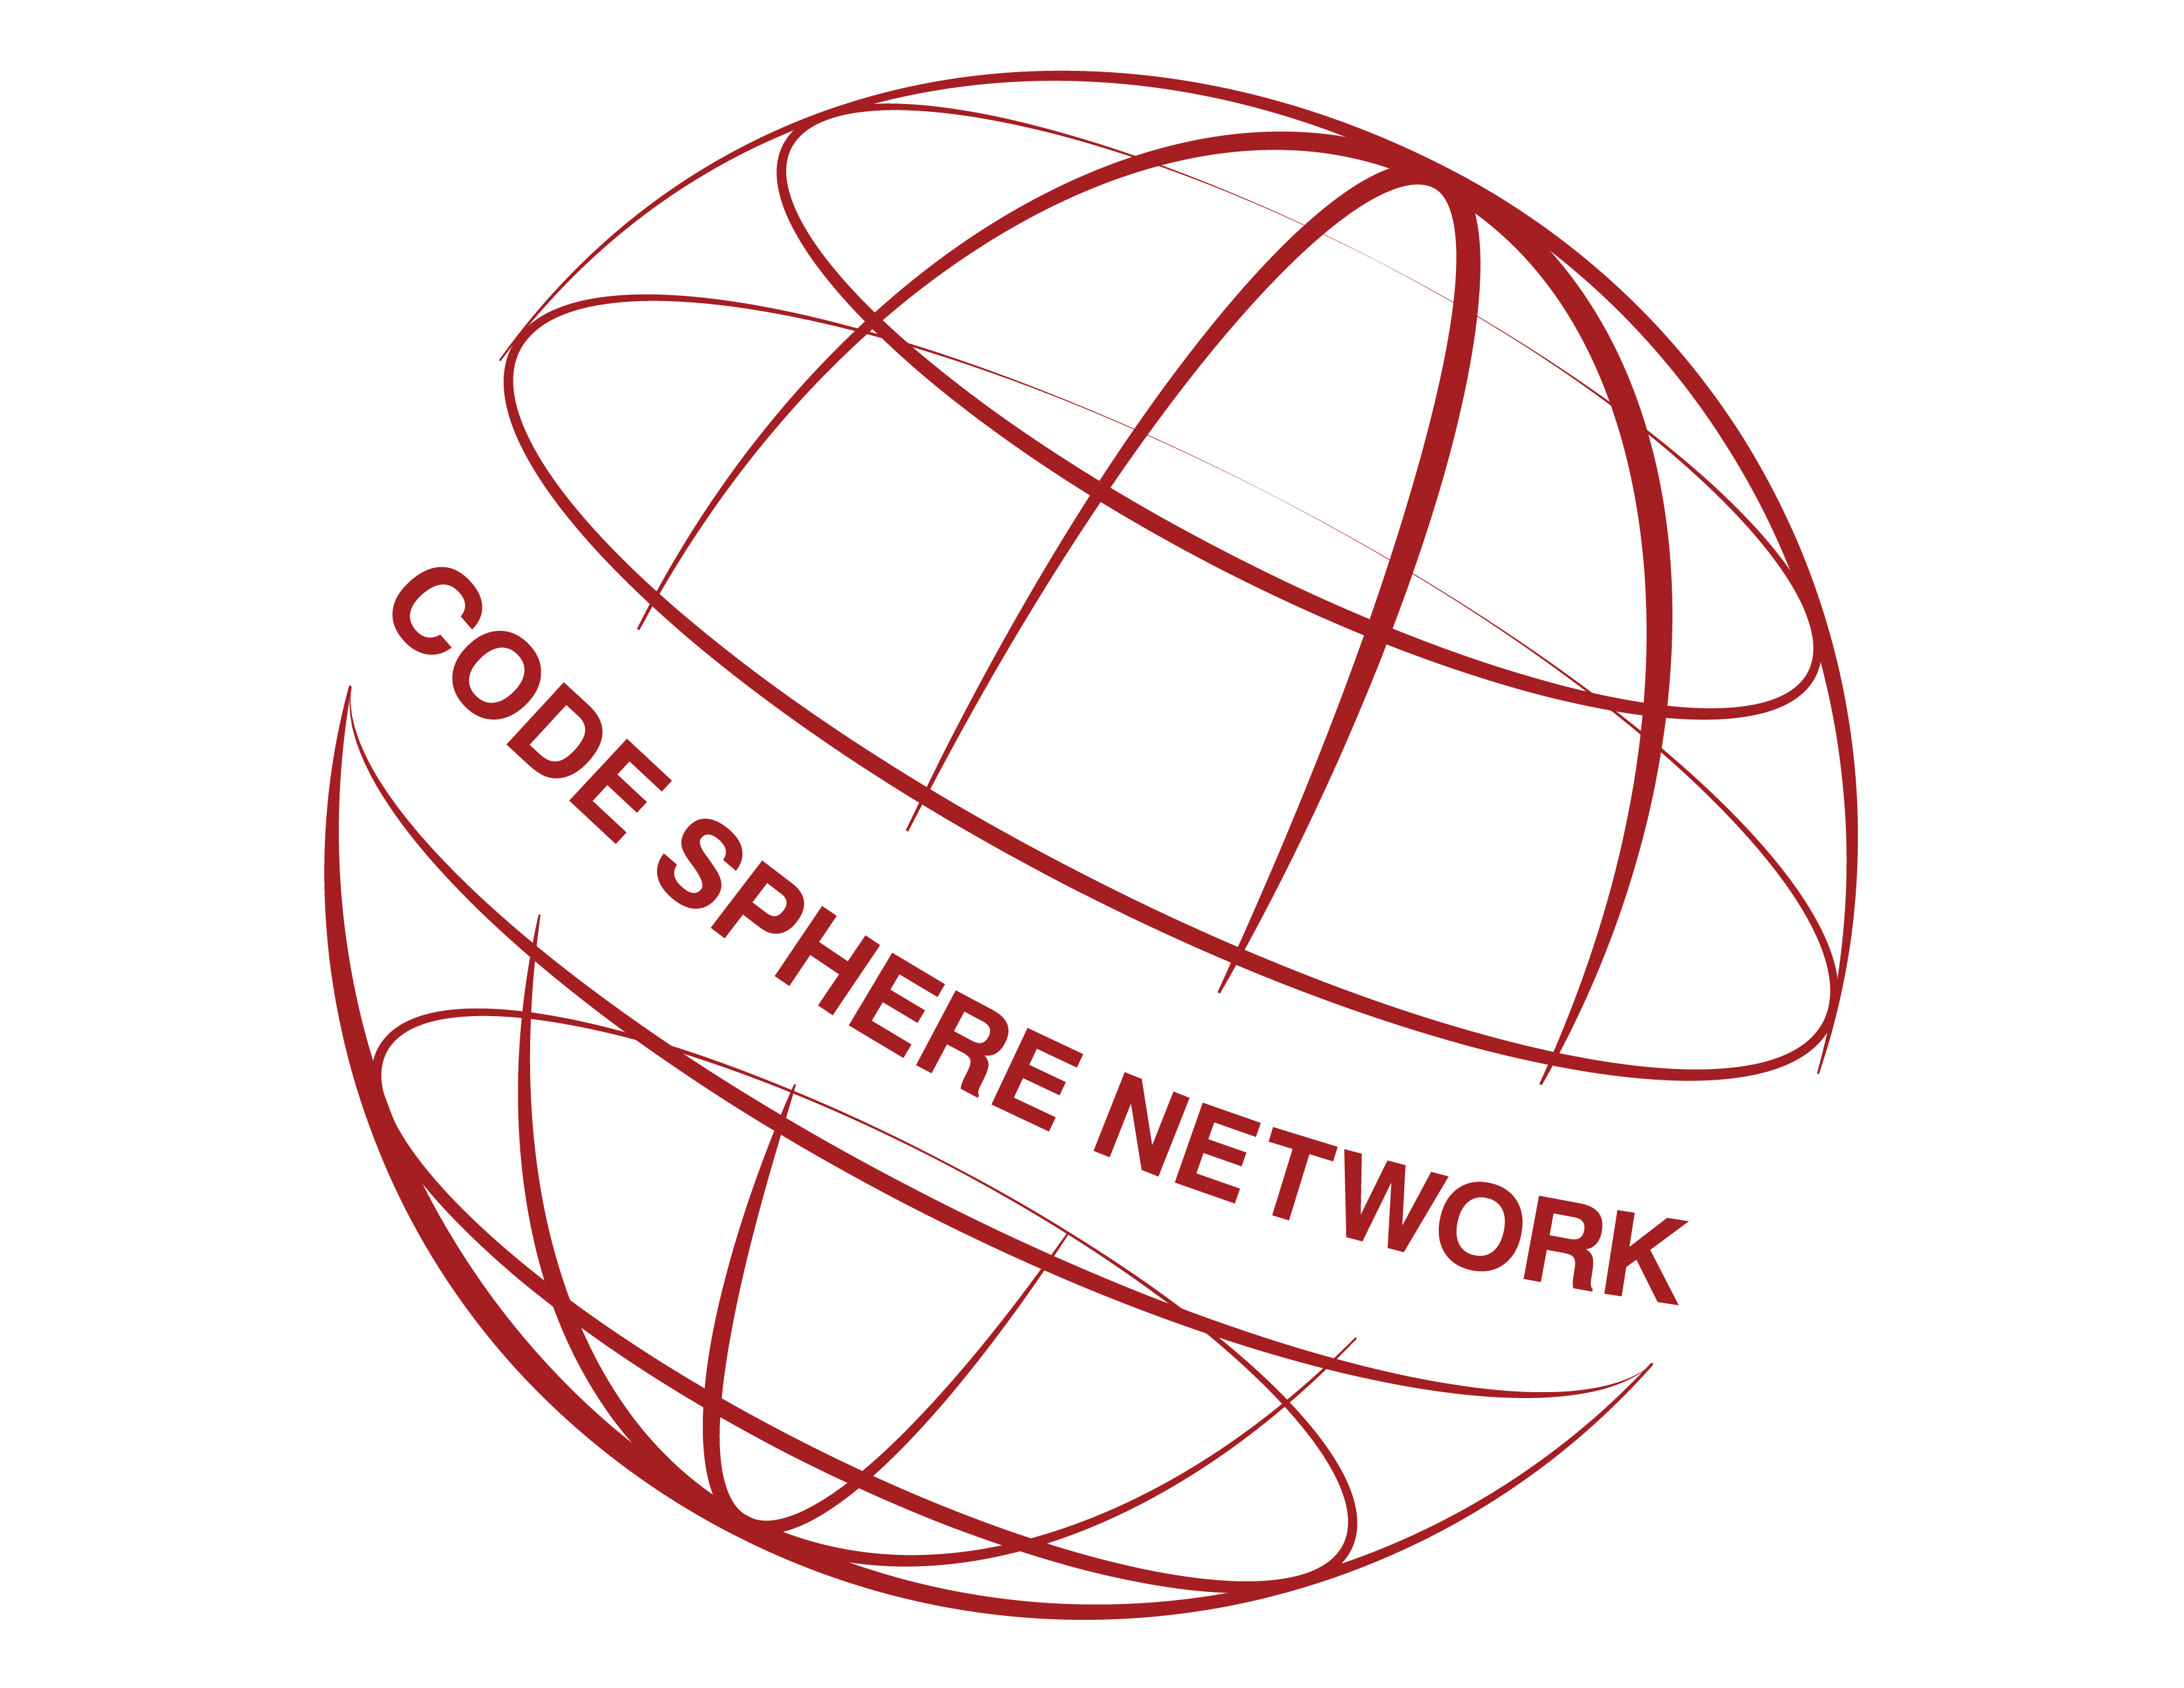 Logo-Code Sphere Network-red-transparent